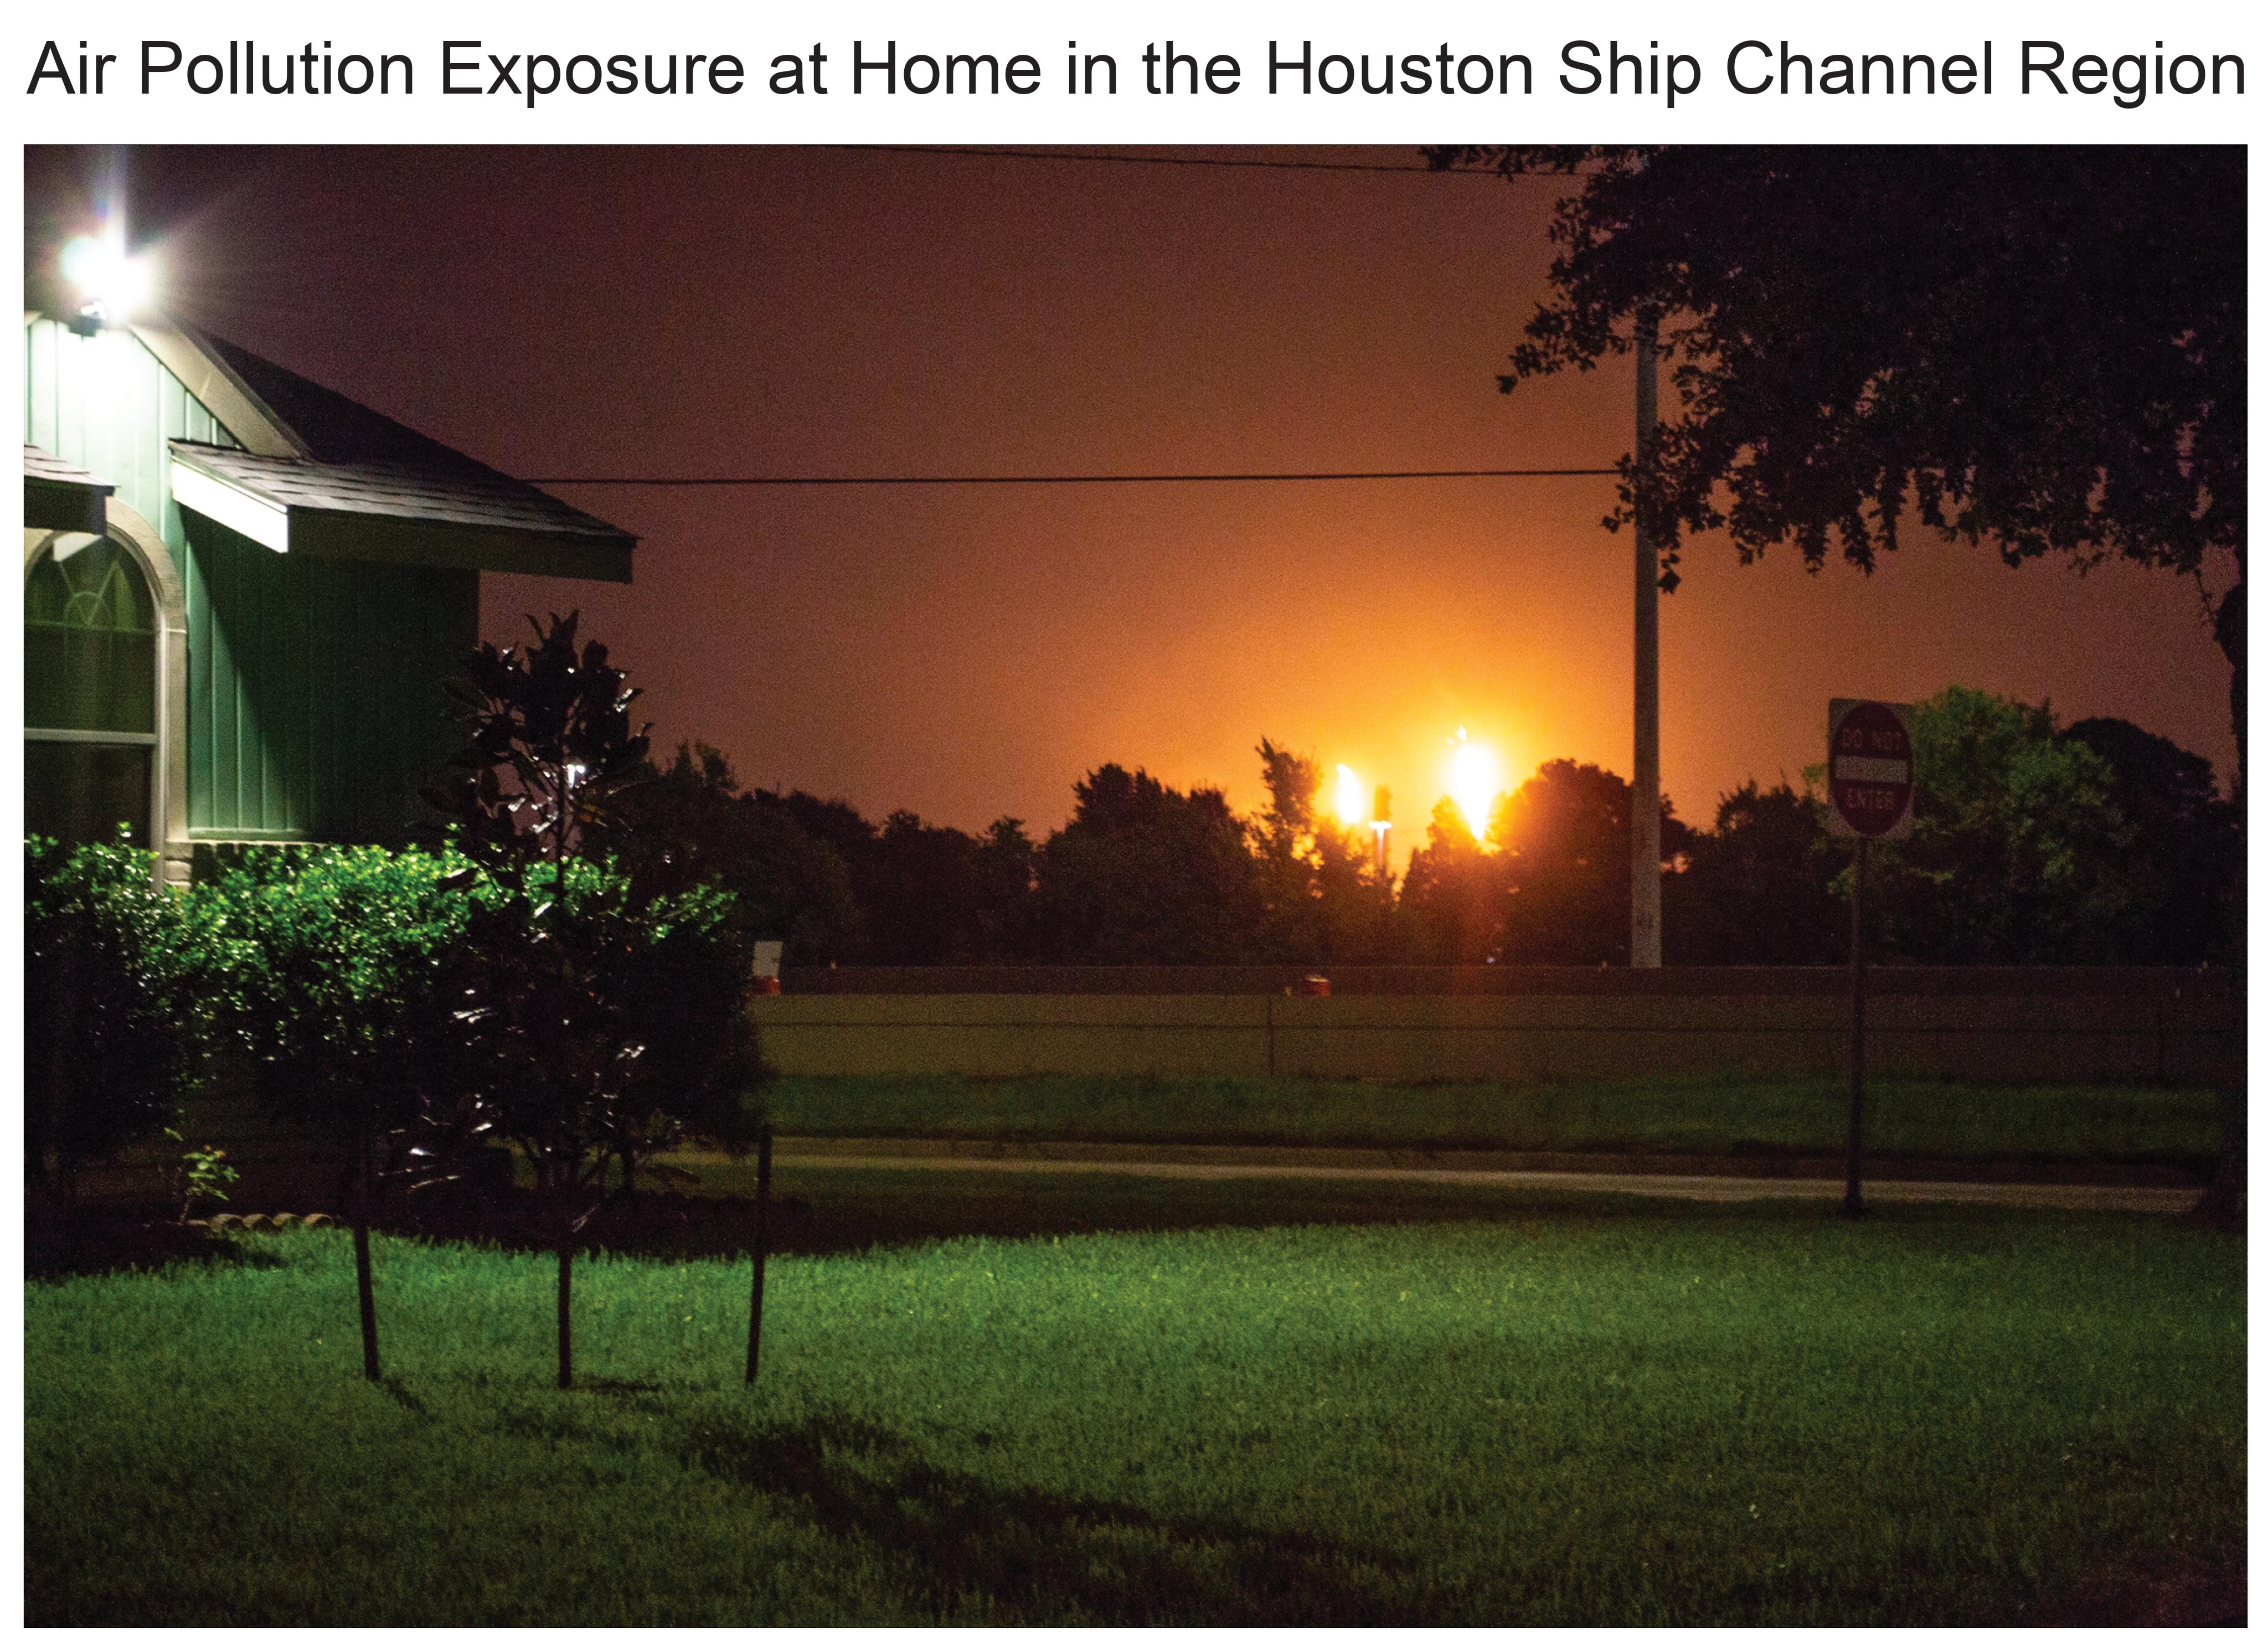 Air Pollution Exposure at Home in the Houston Ship Channel Region